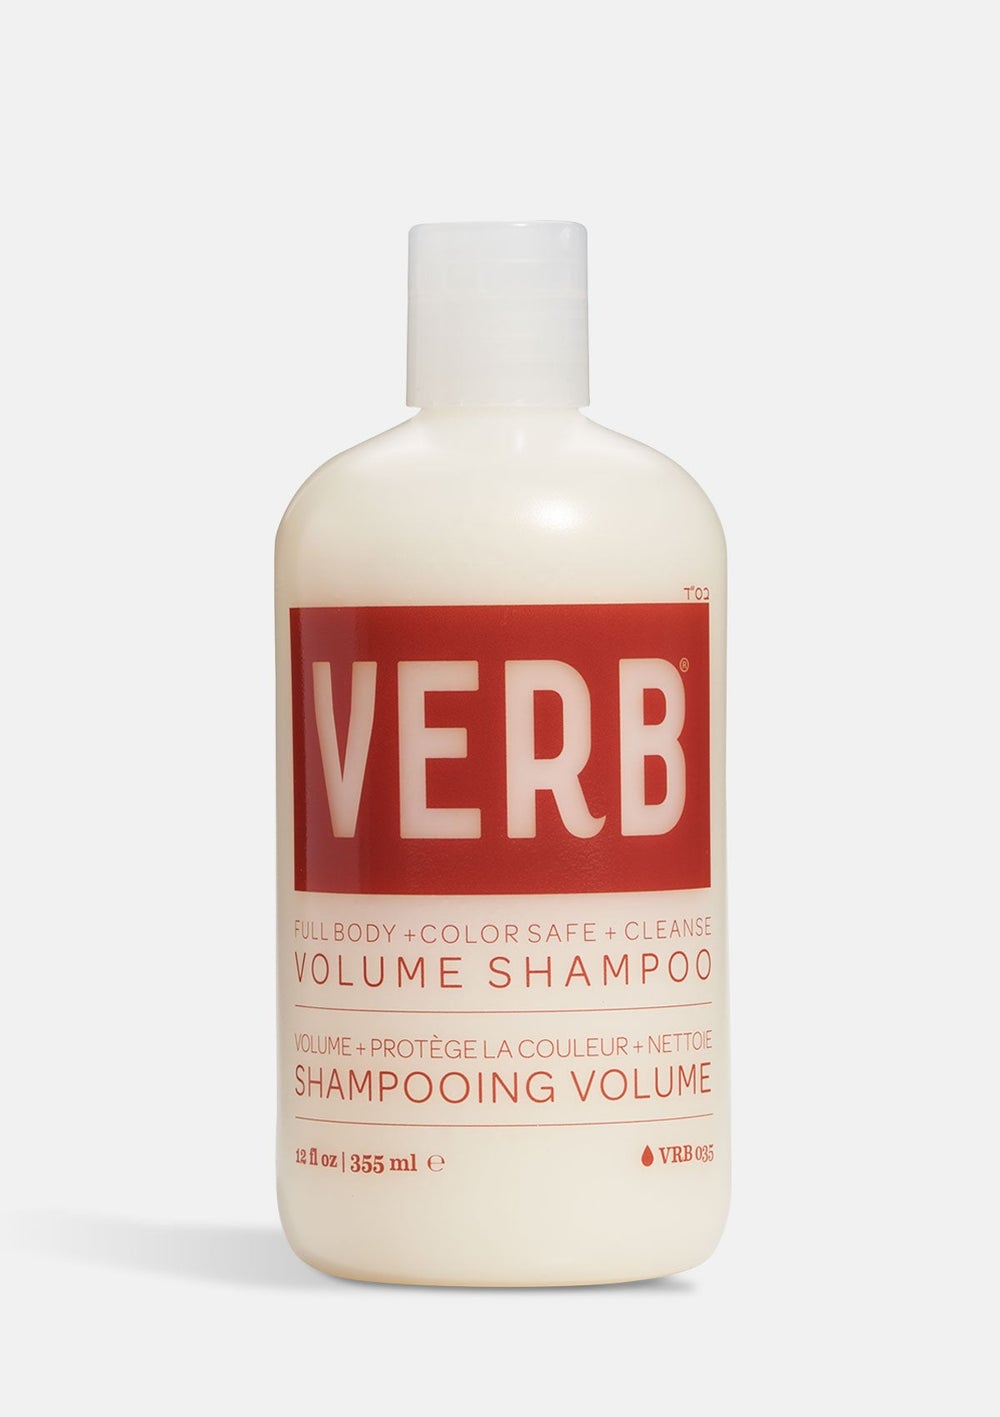 Verb - Volume Duo Cleanse + Full Body + Weightless Lift + Soften |12 oz| - ProCare Outlet by Verb